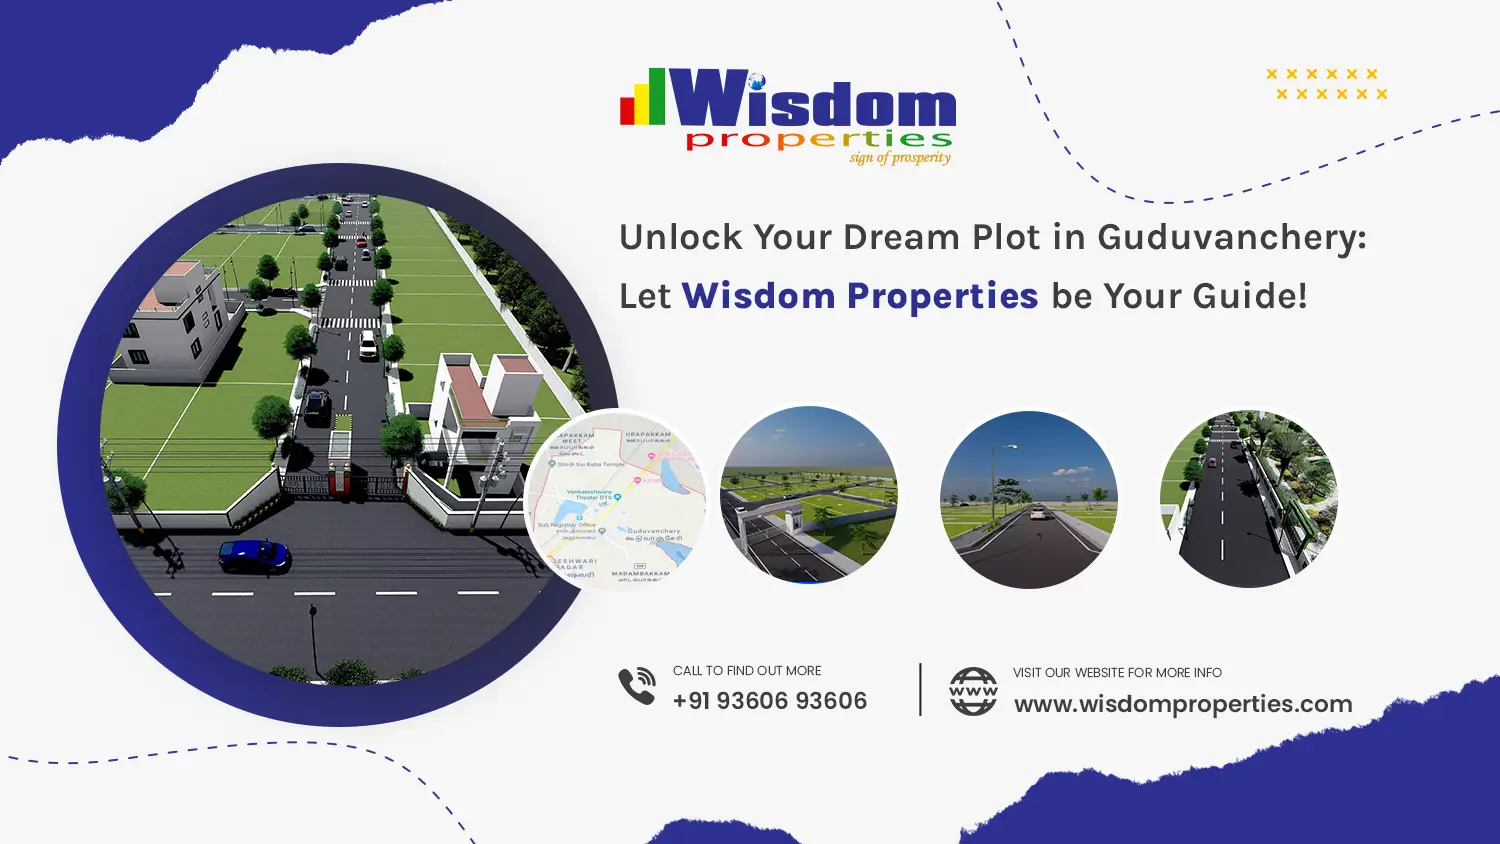 Discover Prime Plots for Sale in Guduvanchery's Thriving Market